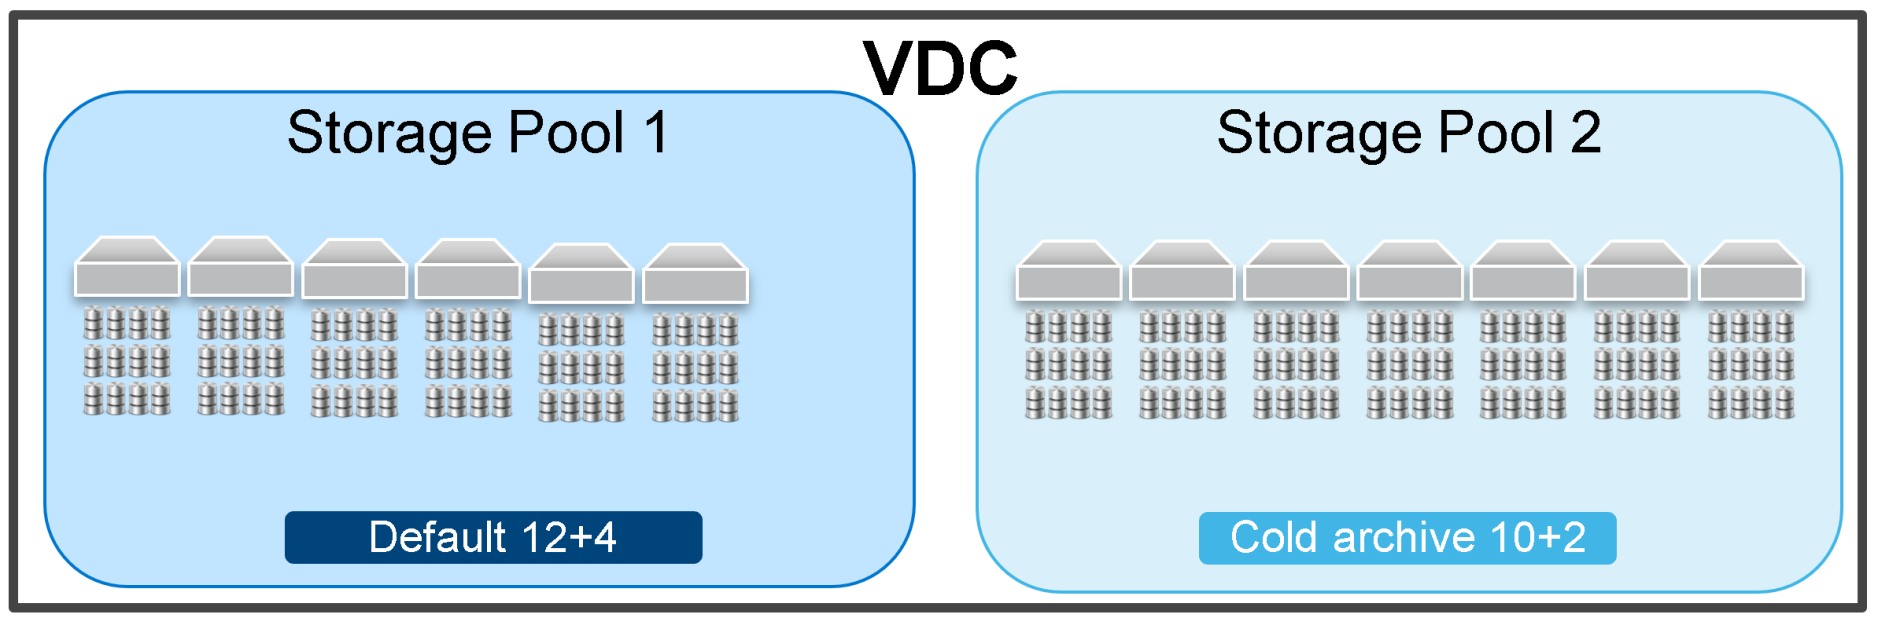 VDC with two storage pools configured, one with default erasure-coding and the other with cold archive.